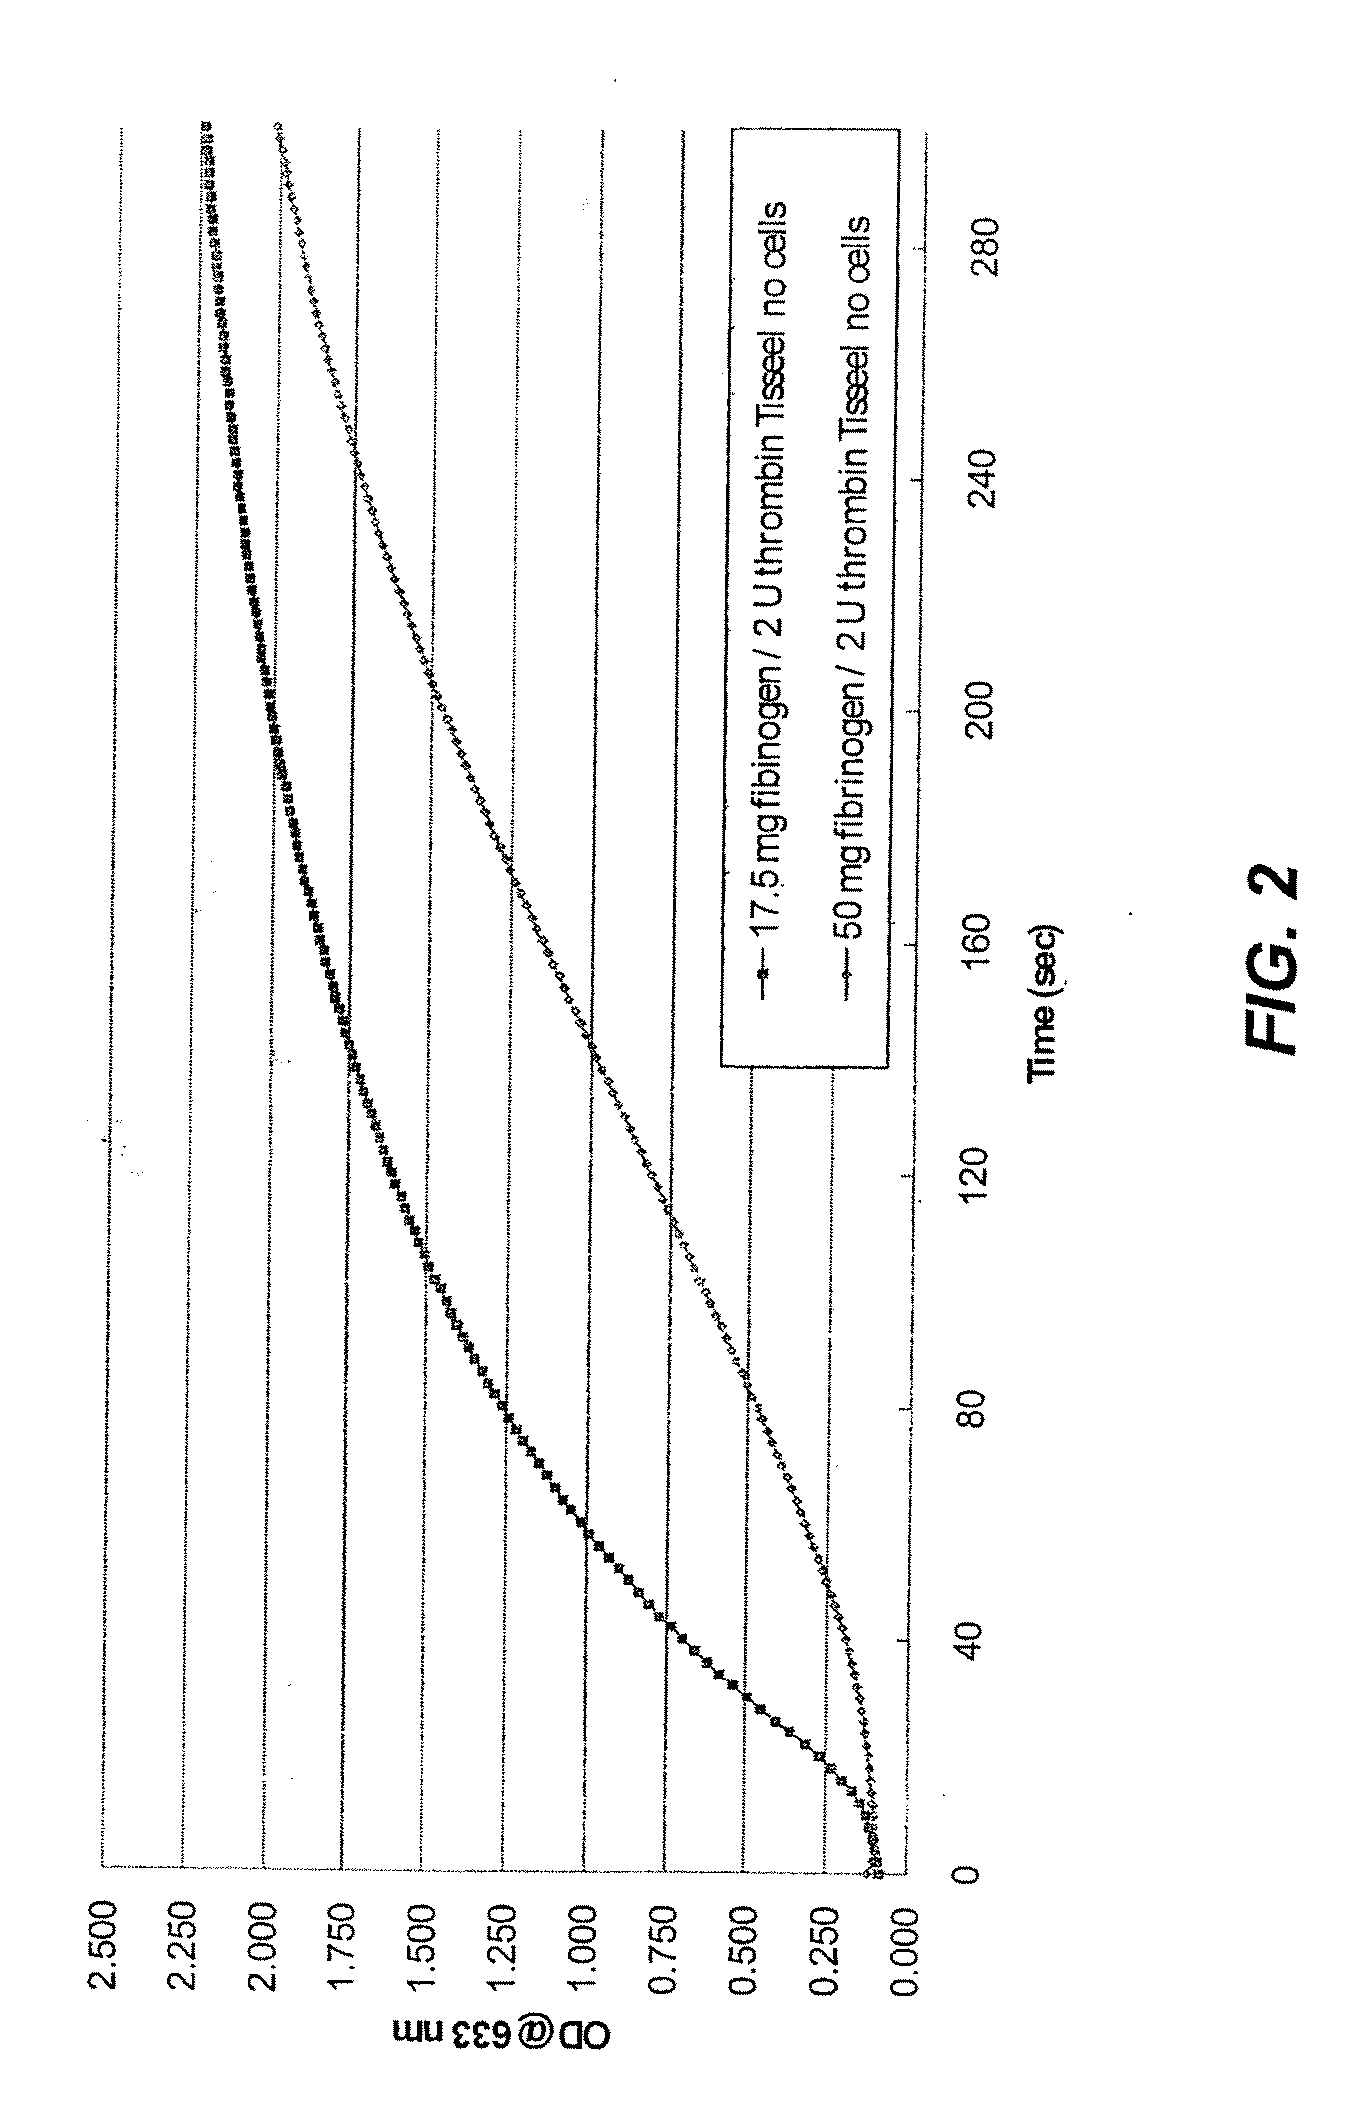 Using of scaffold comprising fibrin for delivery of stem cells